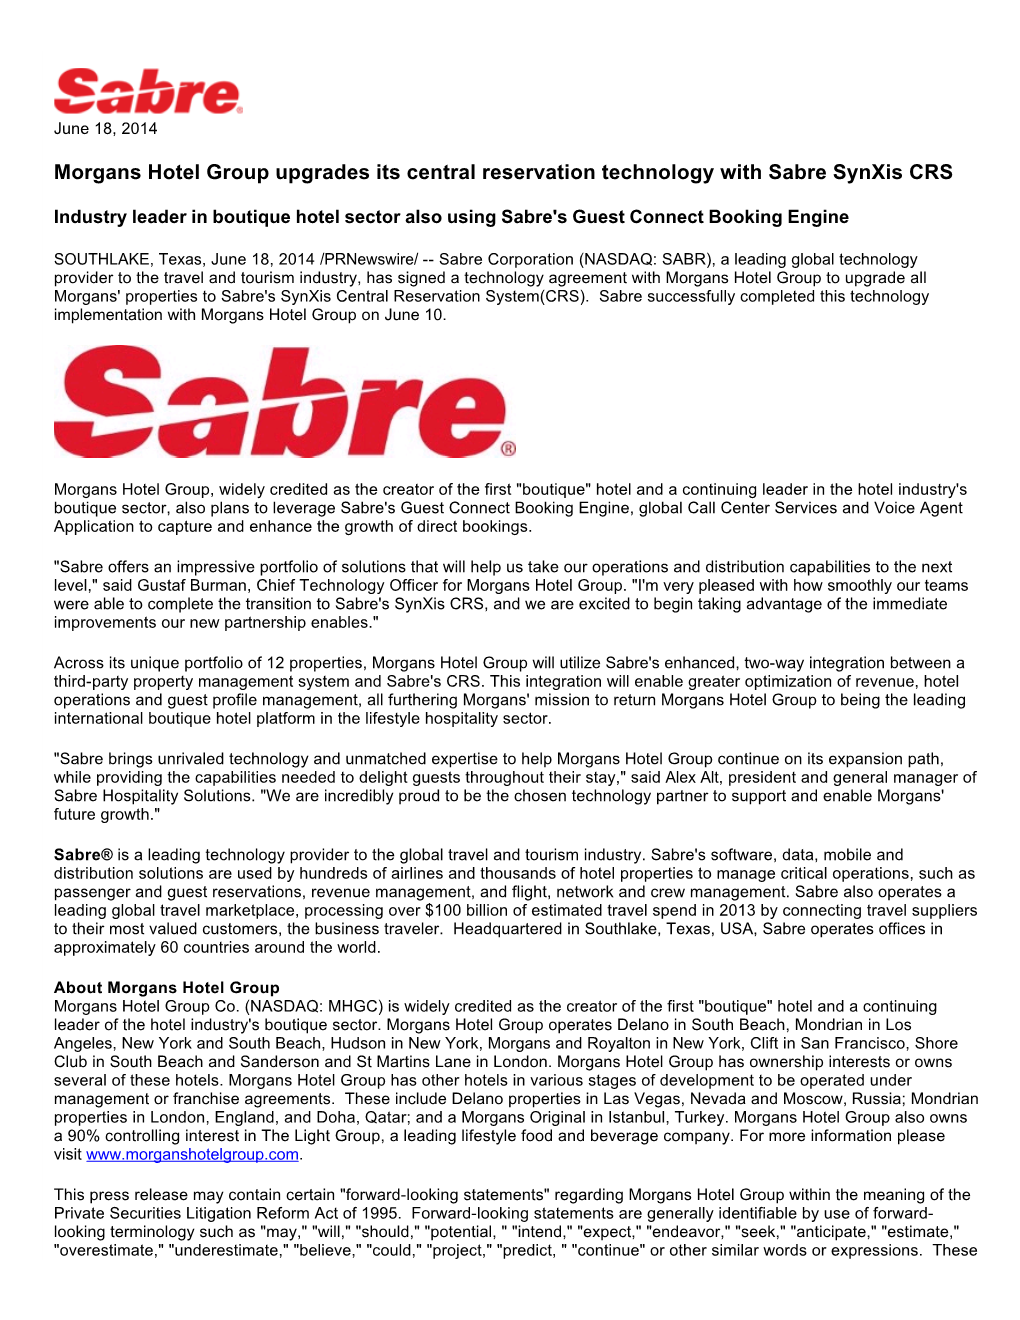 Morgans Hotel Group Upgrades Its Central Reservation Technology with Sabre Synxis CRS